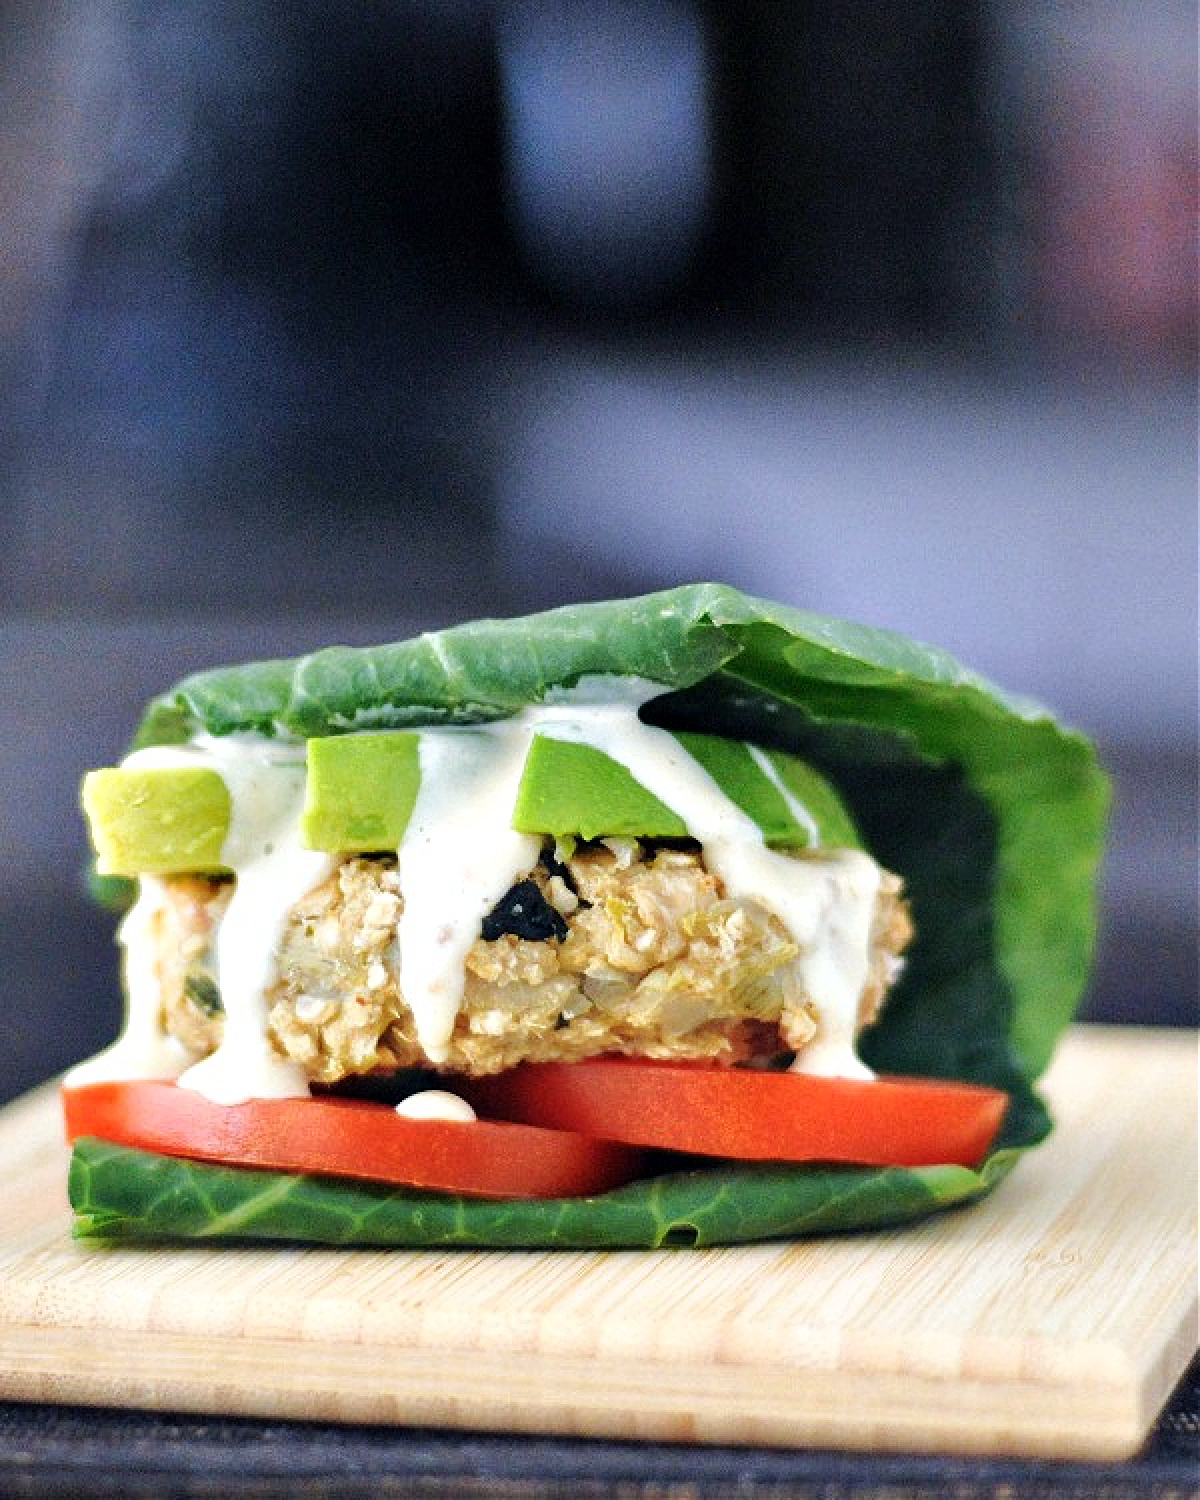 A veggie burger is topped with tomato, avocado, and wrapped in a fresh collard leaf. Burger sits on a small wooden serving board.